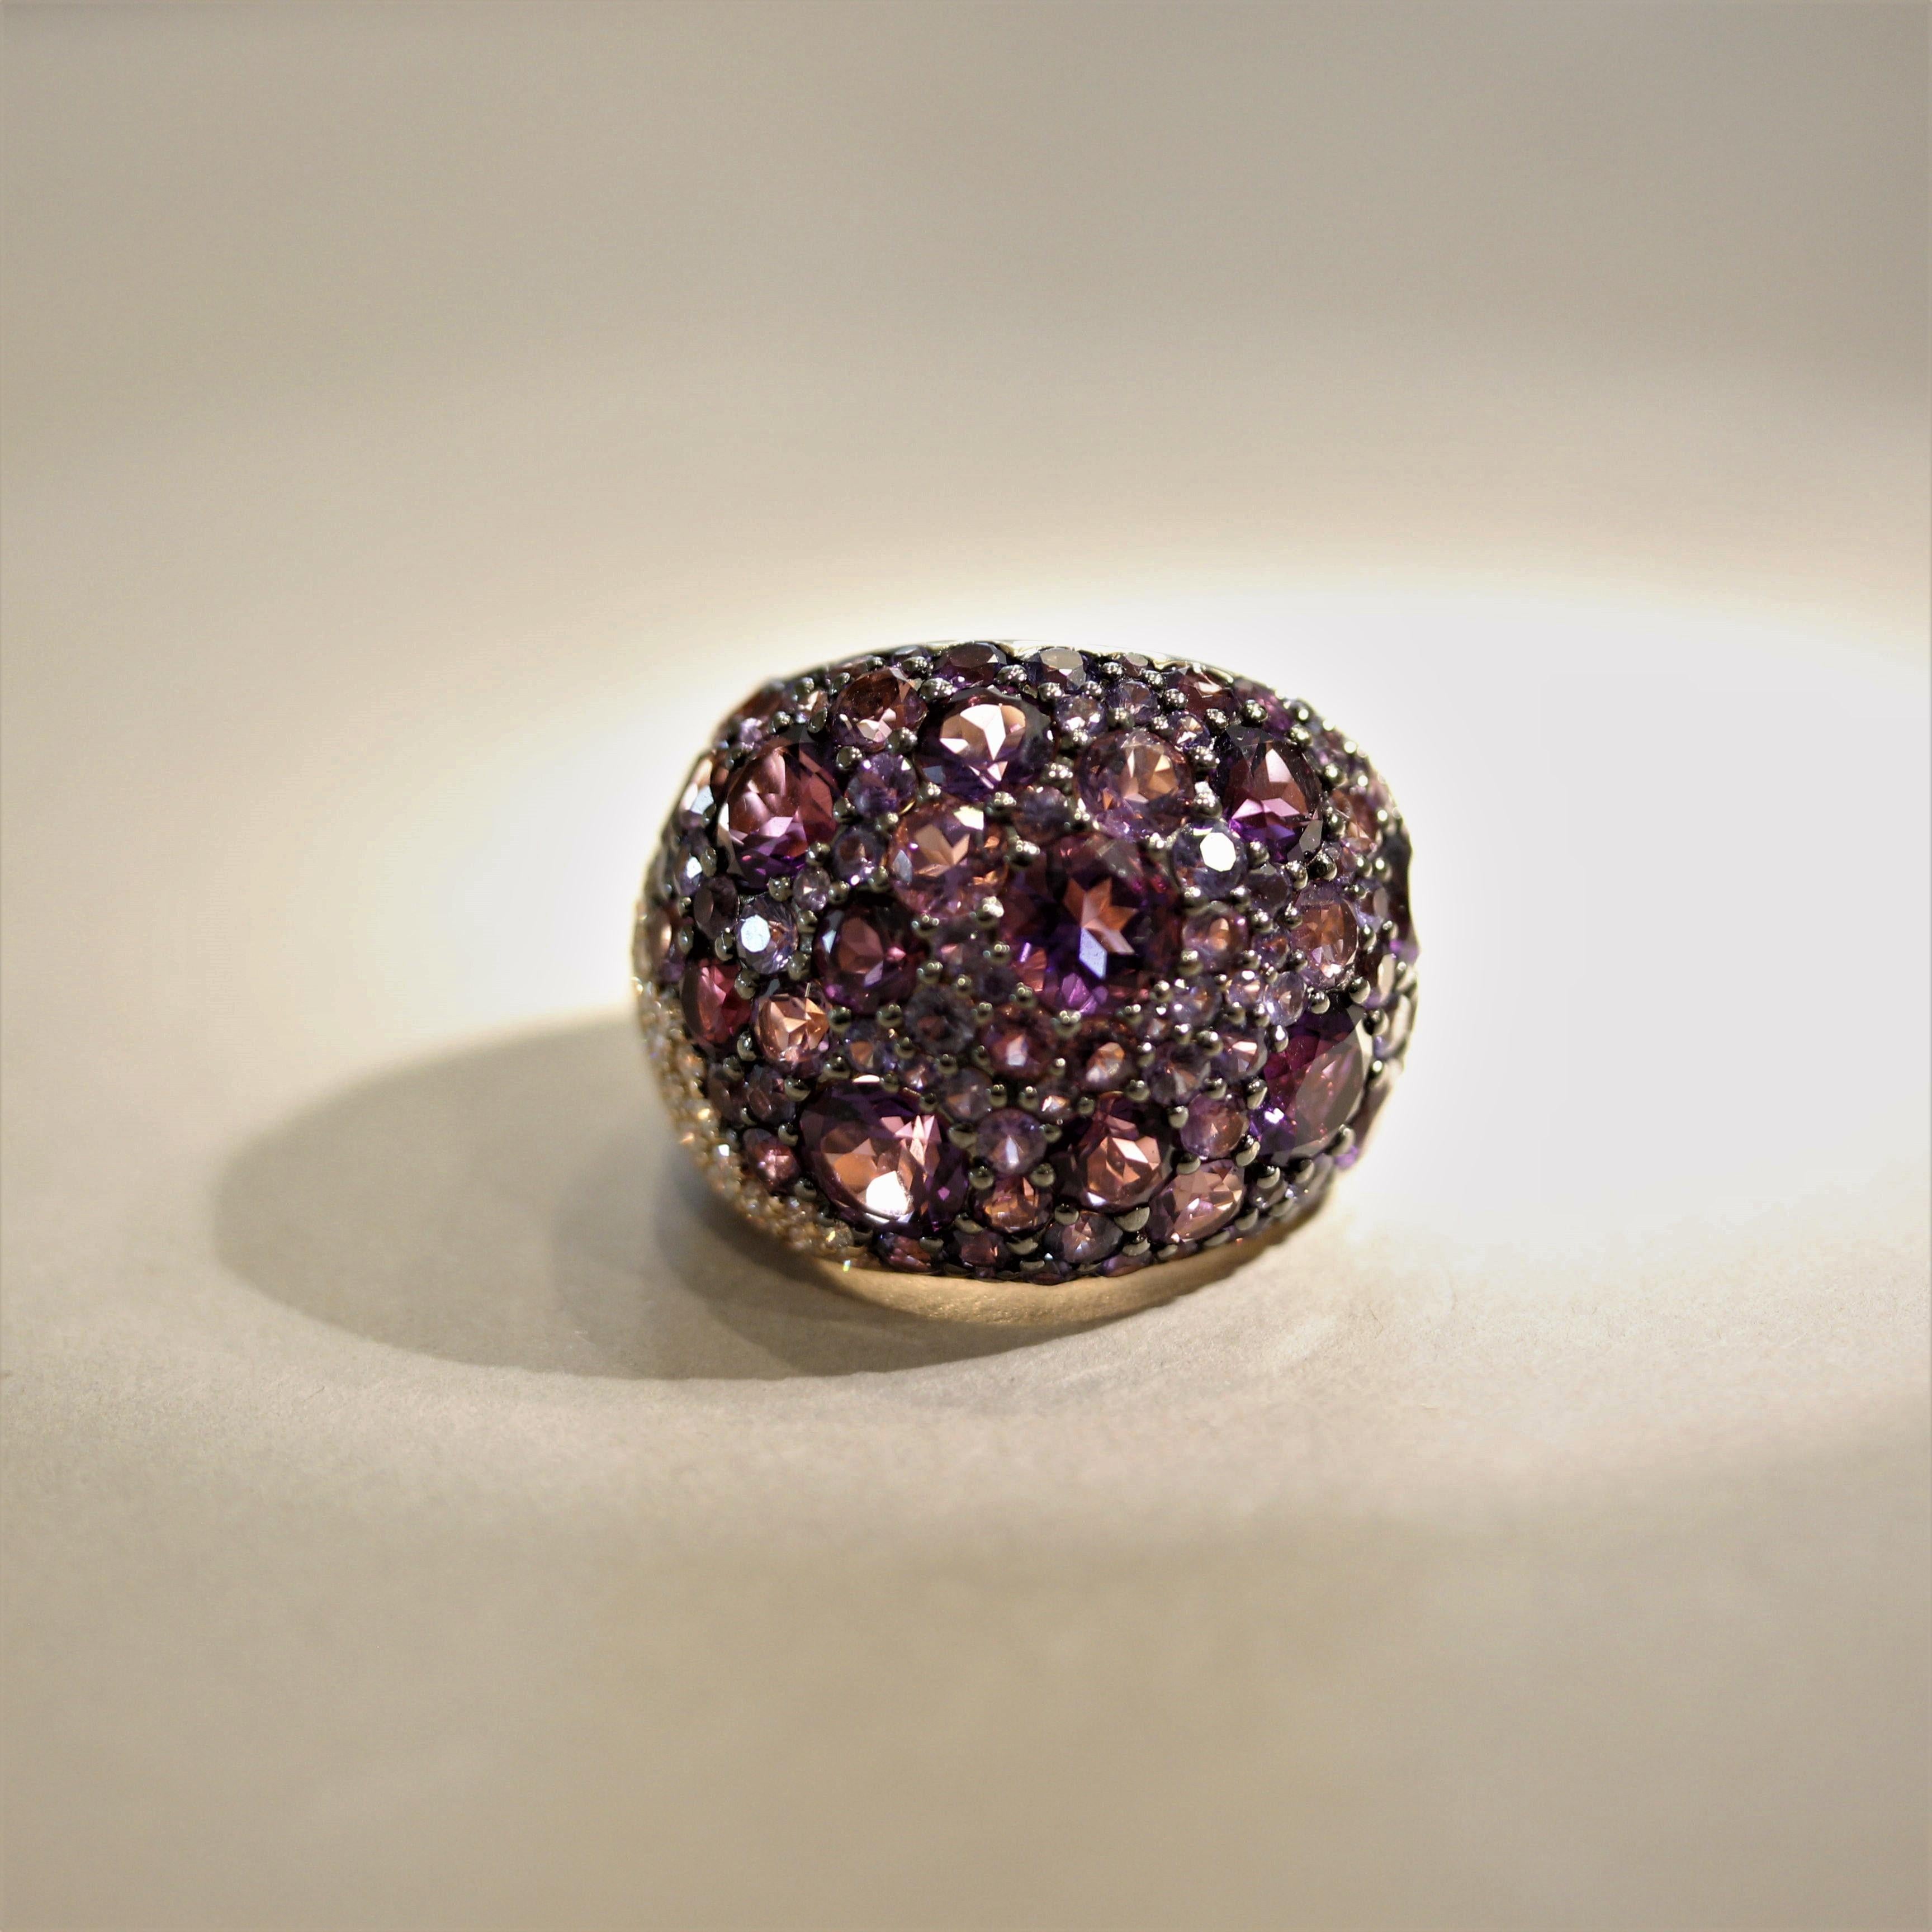 Simply a stunning and fashionable cocktail ring! It features 7.99 carats of round-shaped bright purple amethyst set across the ring. Adding to that are 2.40 carats of sapphires in various shades of purple which are pave-set between the larger